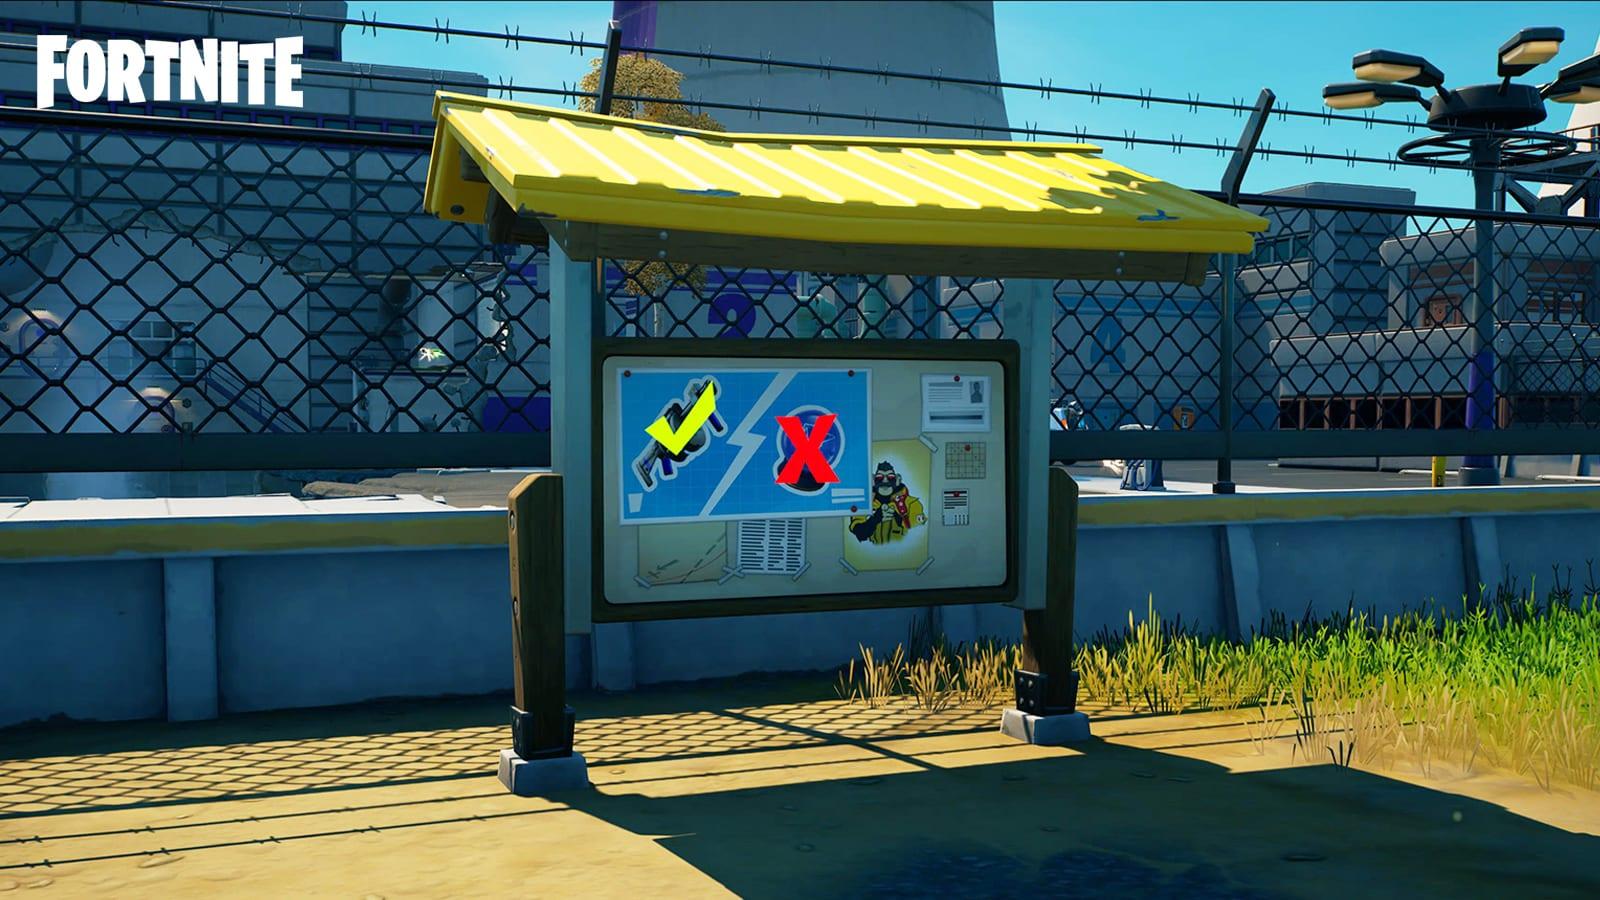 A Funding Station in Fortnite